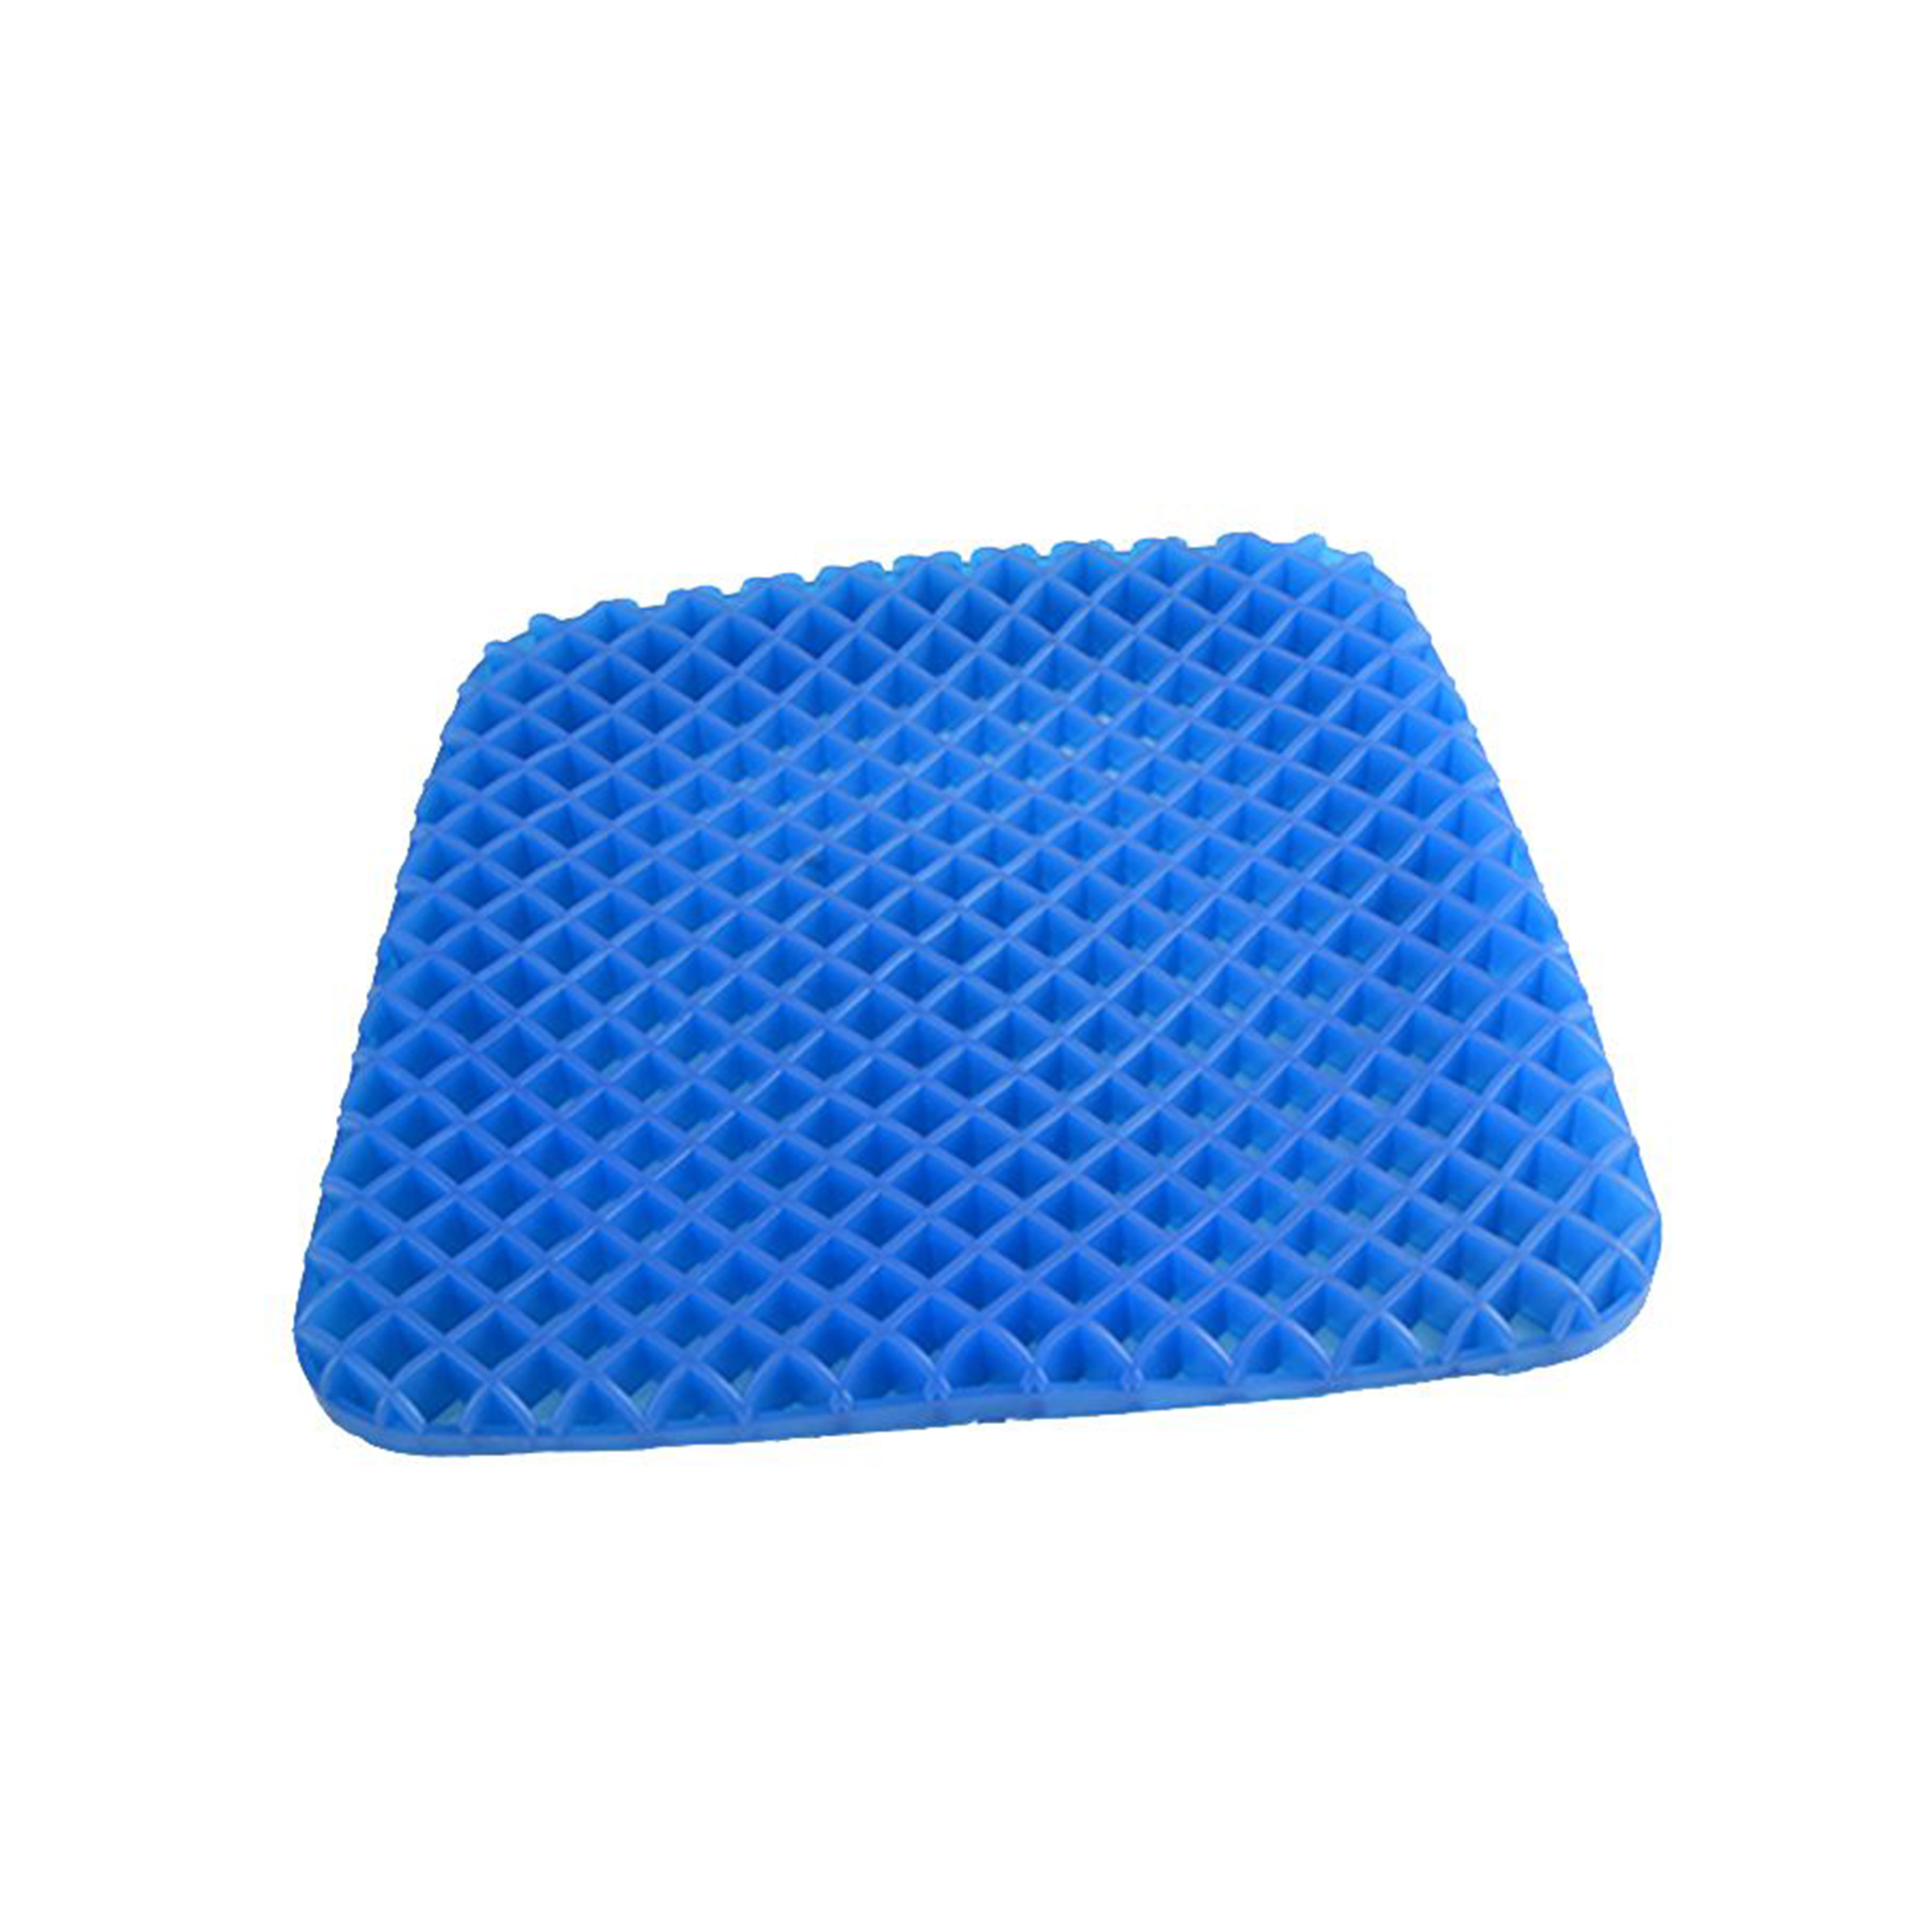 TPE Seat Cushion for Optimal Comfort and Posture Support Honeycomb Gel Cushion Chair Cushion Office Sedentary Ice Cushion Seat